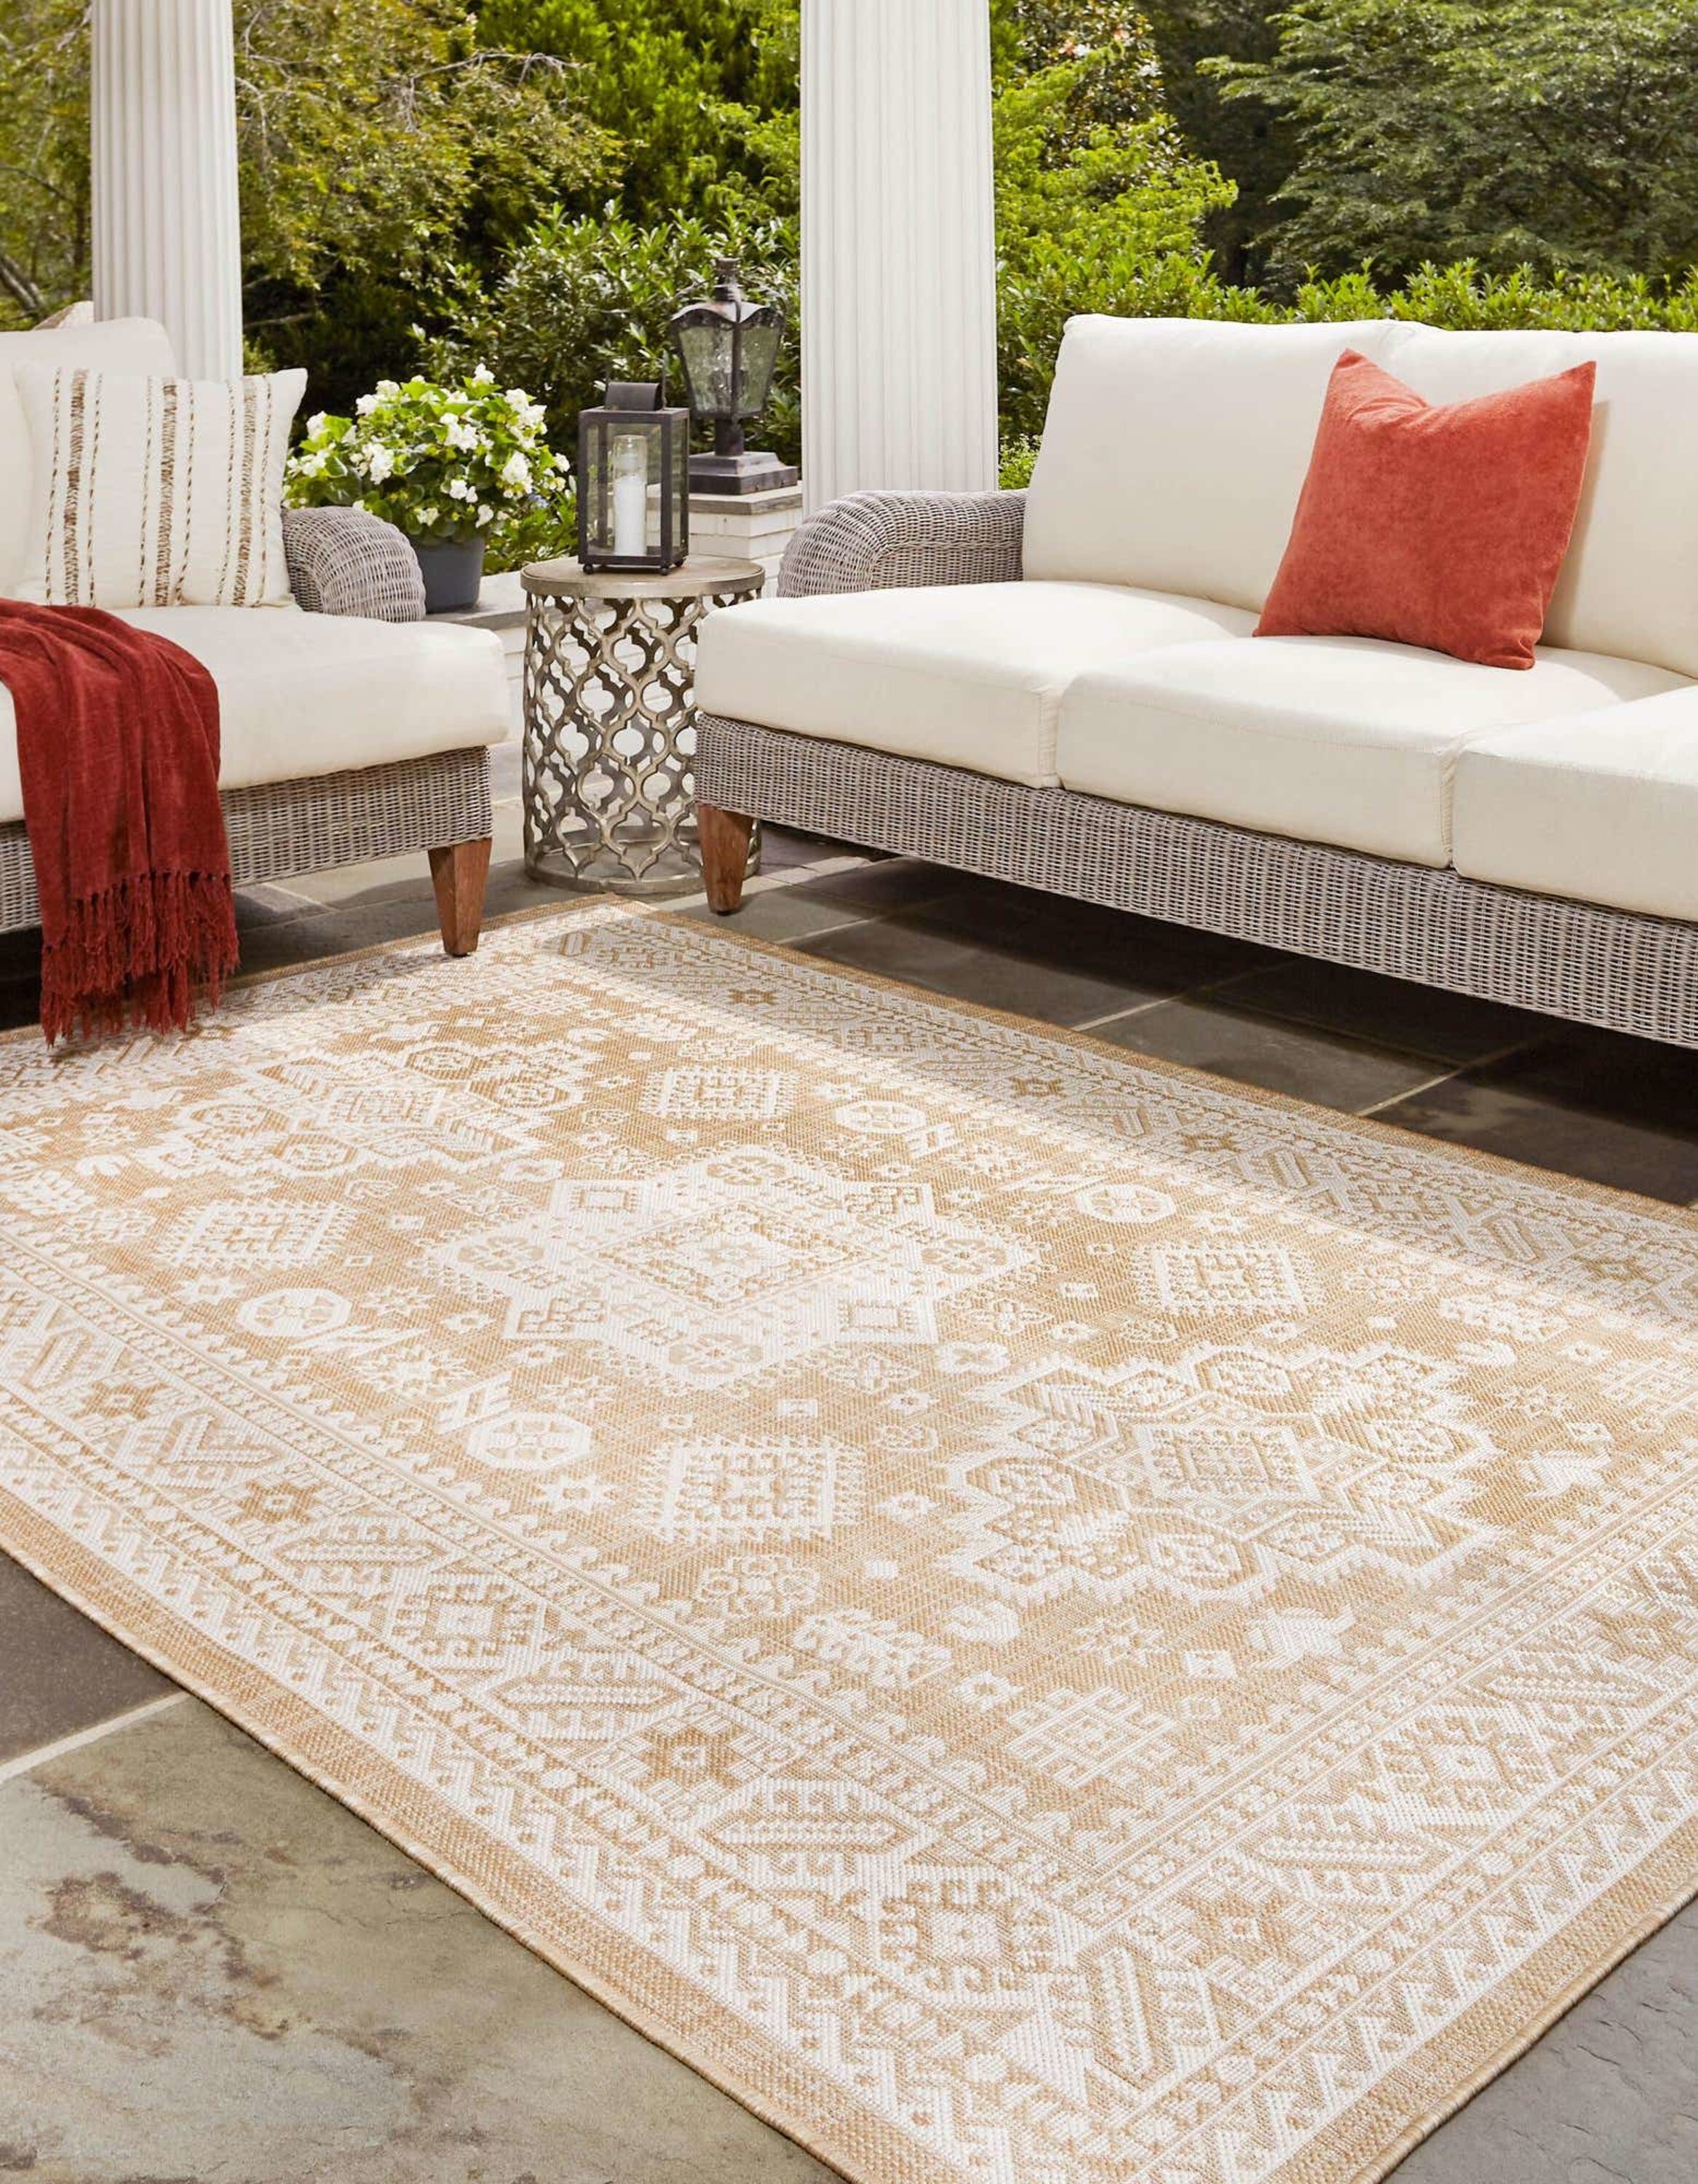 Unique Loom Outdoor Aztec 10 X 10 Yellow Square Indoor/Outdoor Border Area  Rug in the Rugs department at